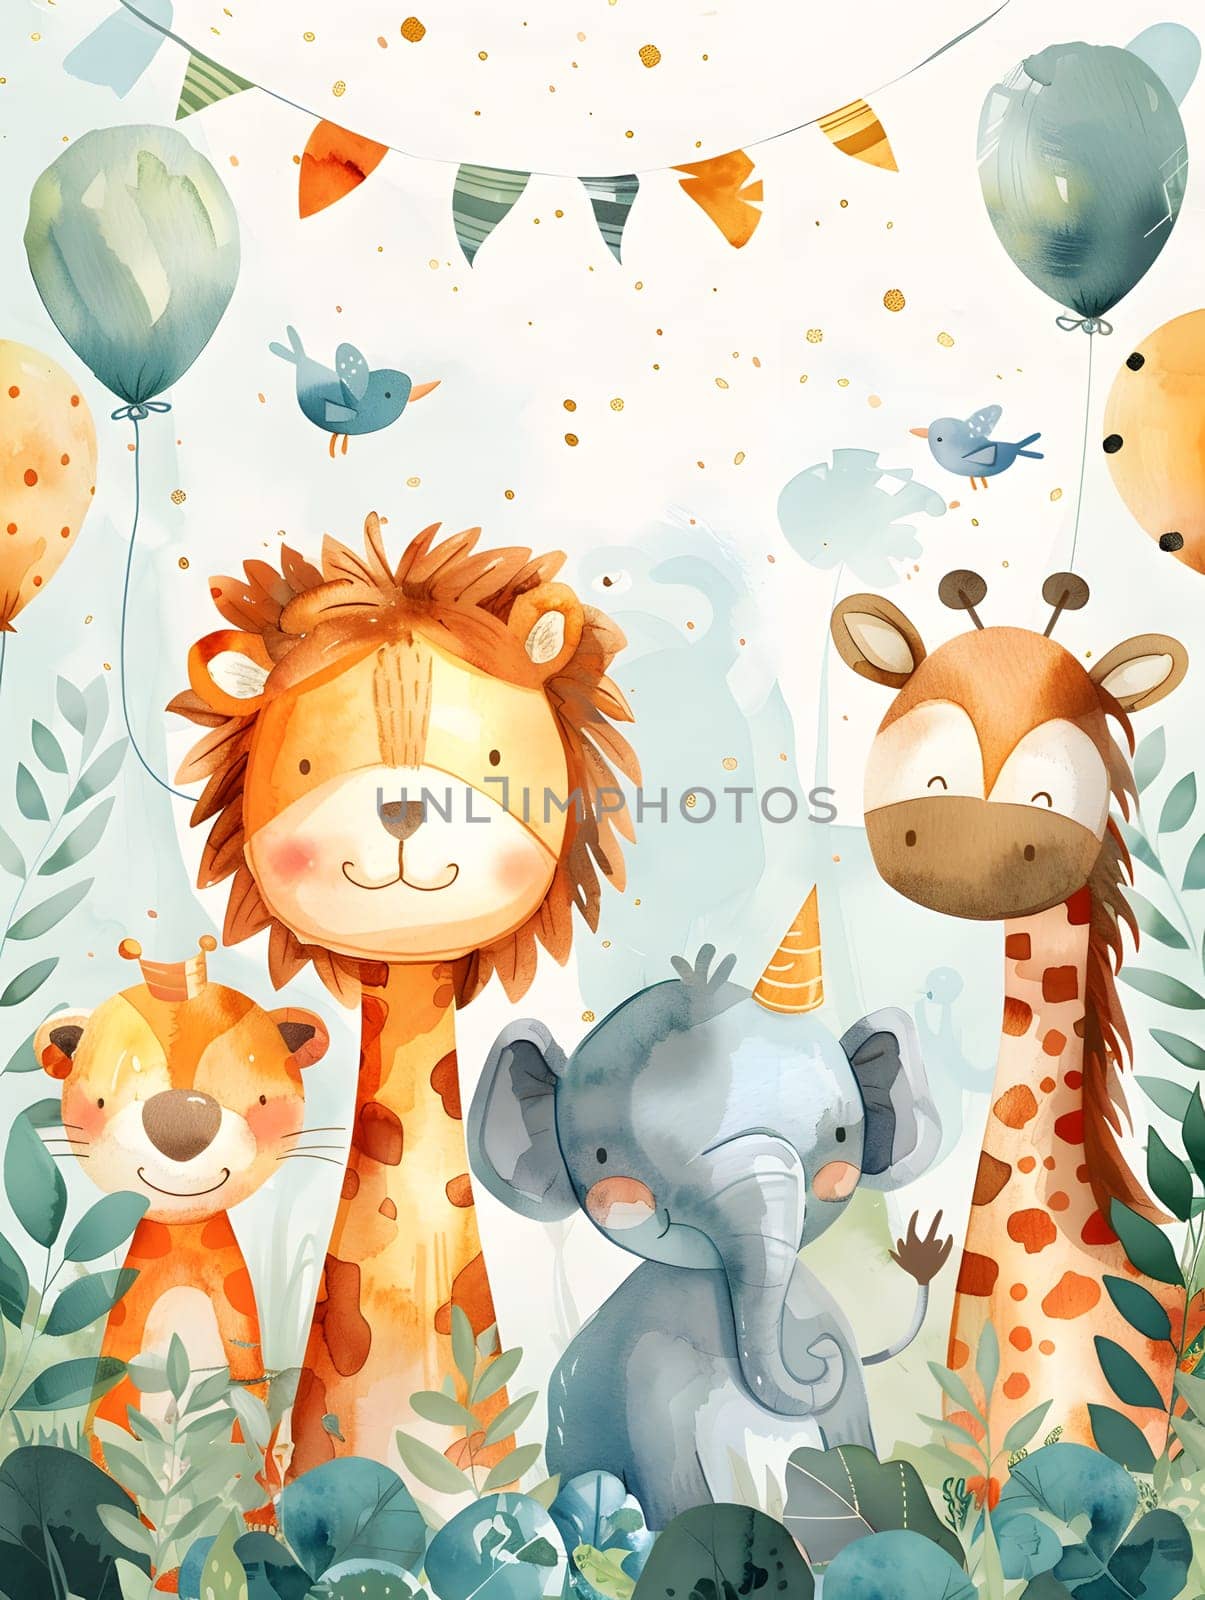 A lion, giraffe, elephant, and tiger in a cartoon illustration celebrating a birthday with balloons, creating a fun and happy atmosphere with smiles all around